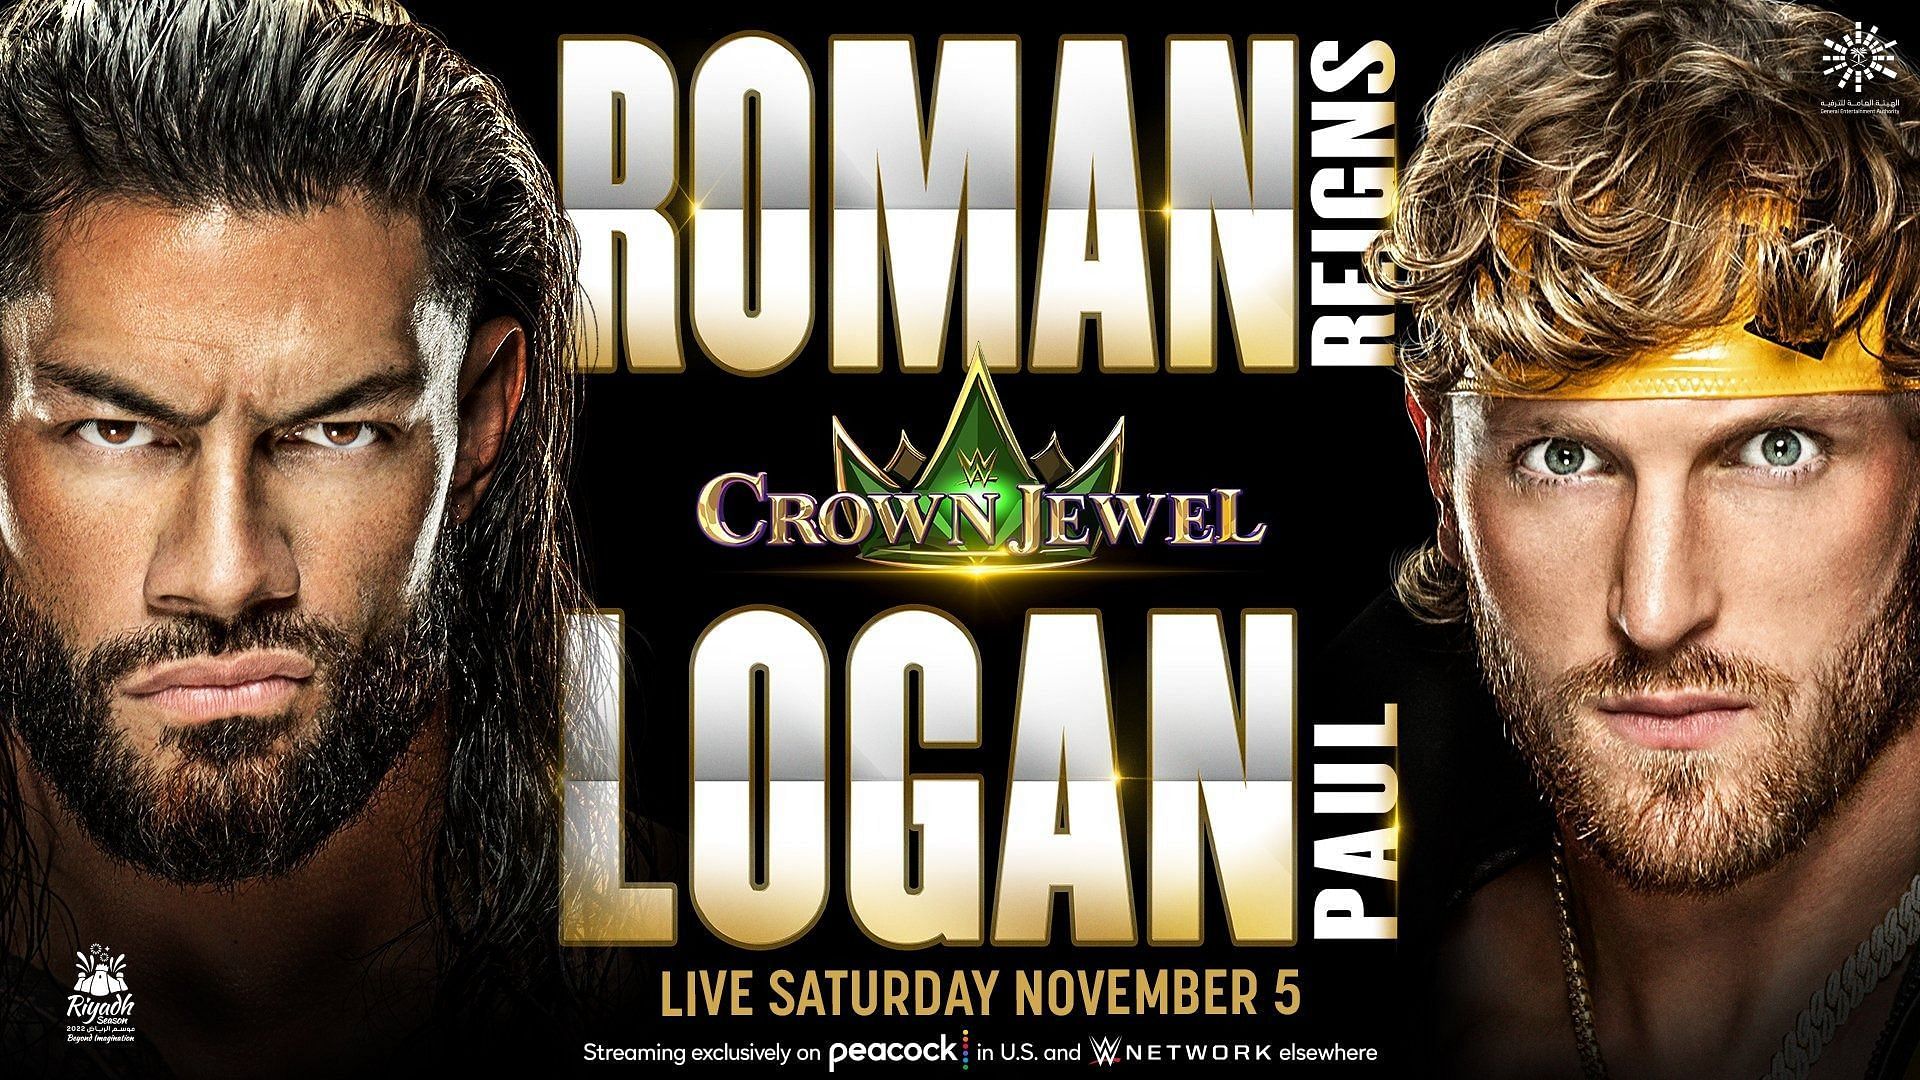 How to watch the official WWE Crown Jewel press conference tomorrow?